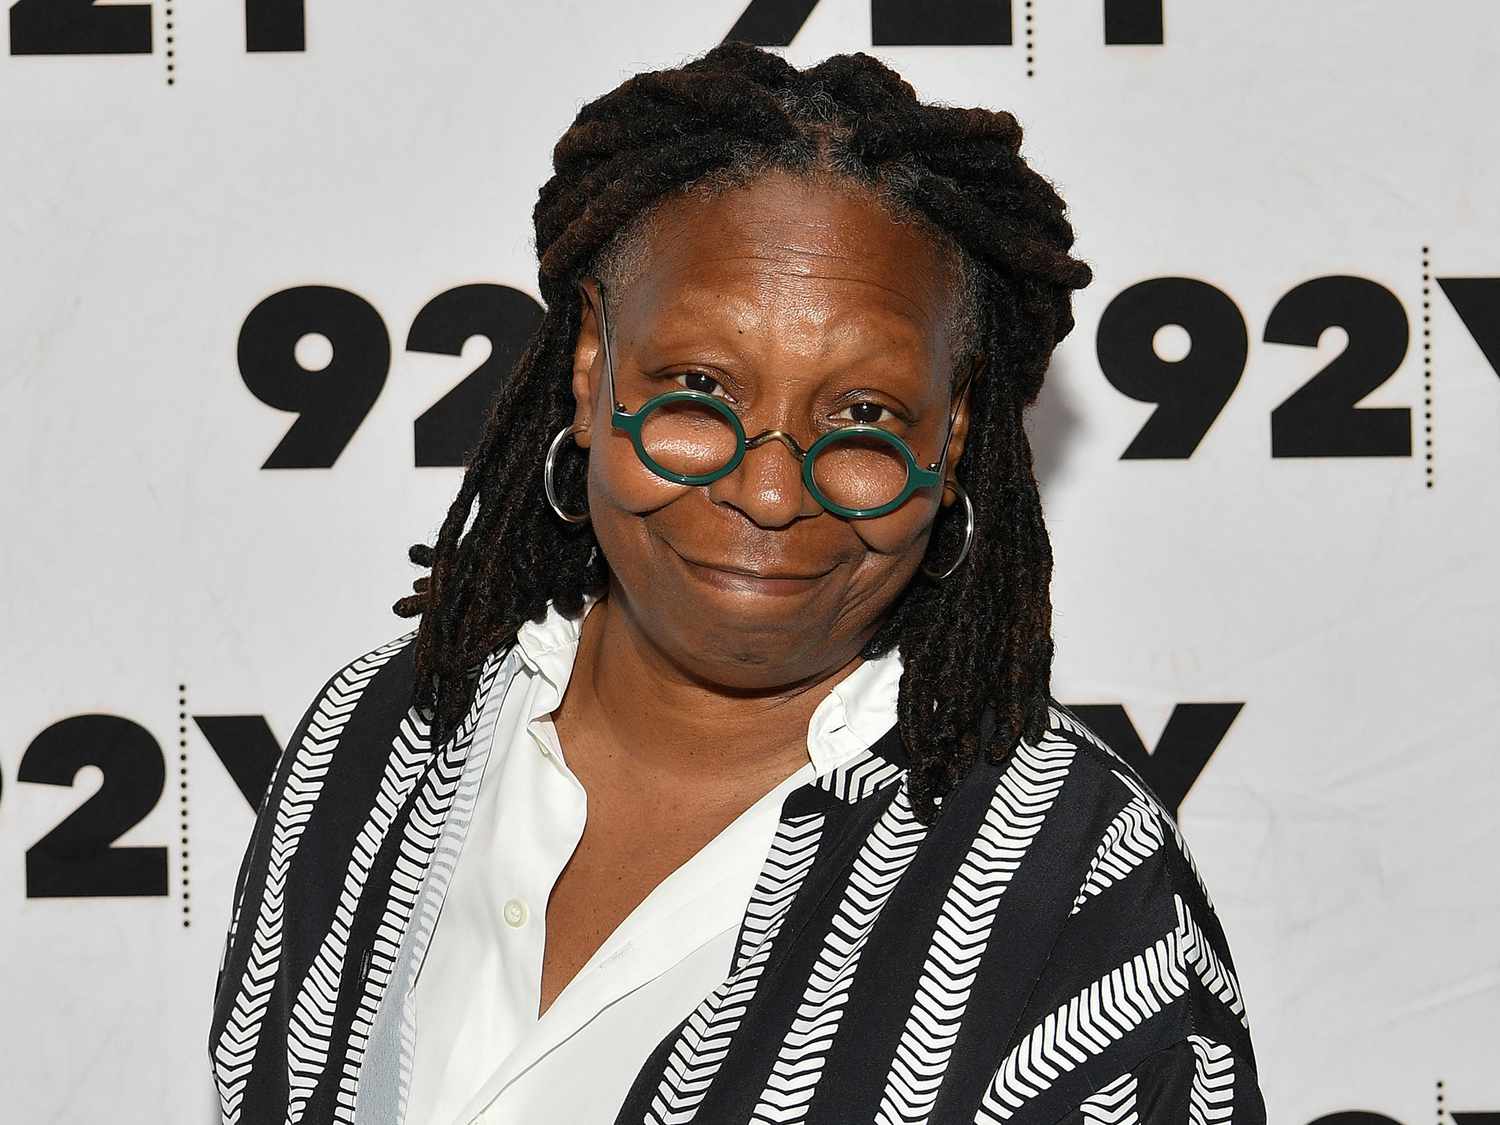 Whoopi Goldberg Counters Nikki Haley’s Claim About U.S. Racism